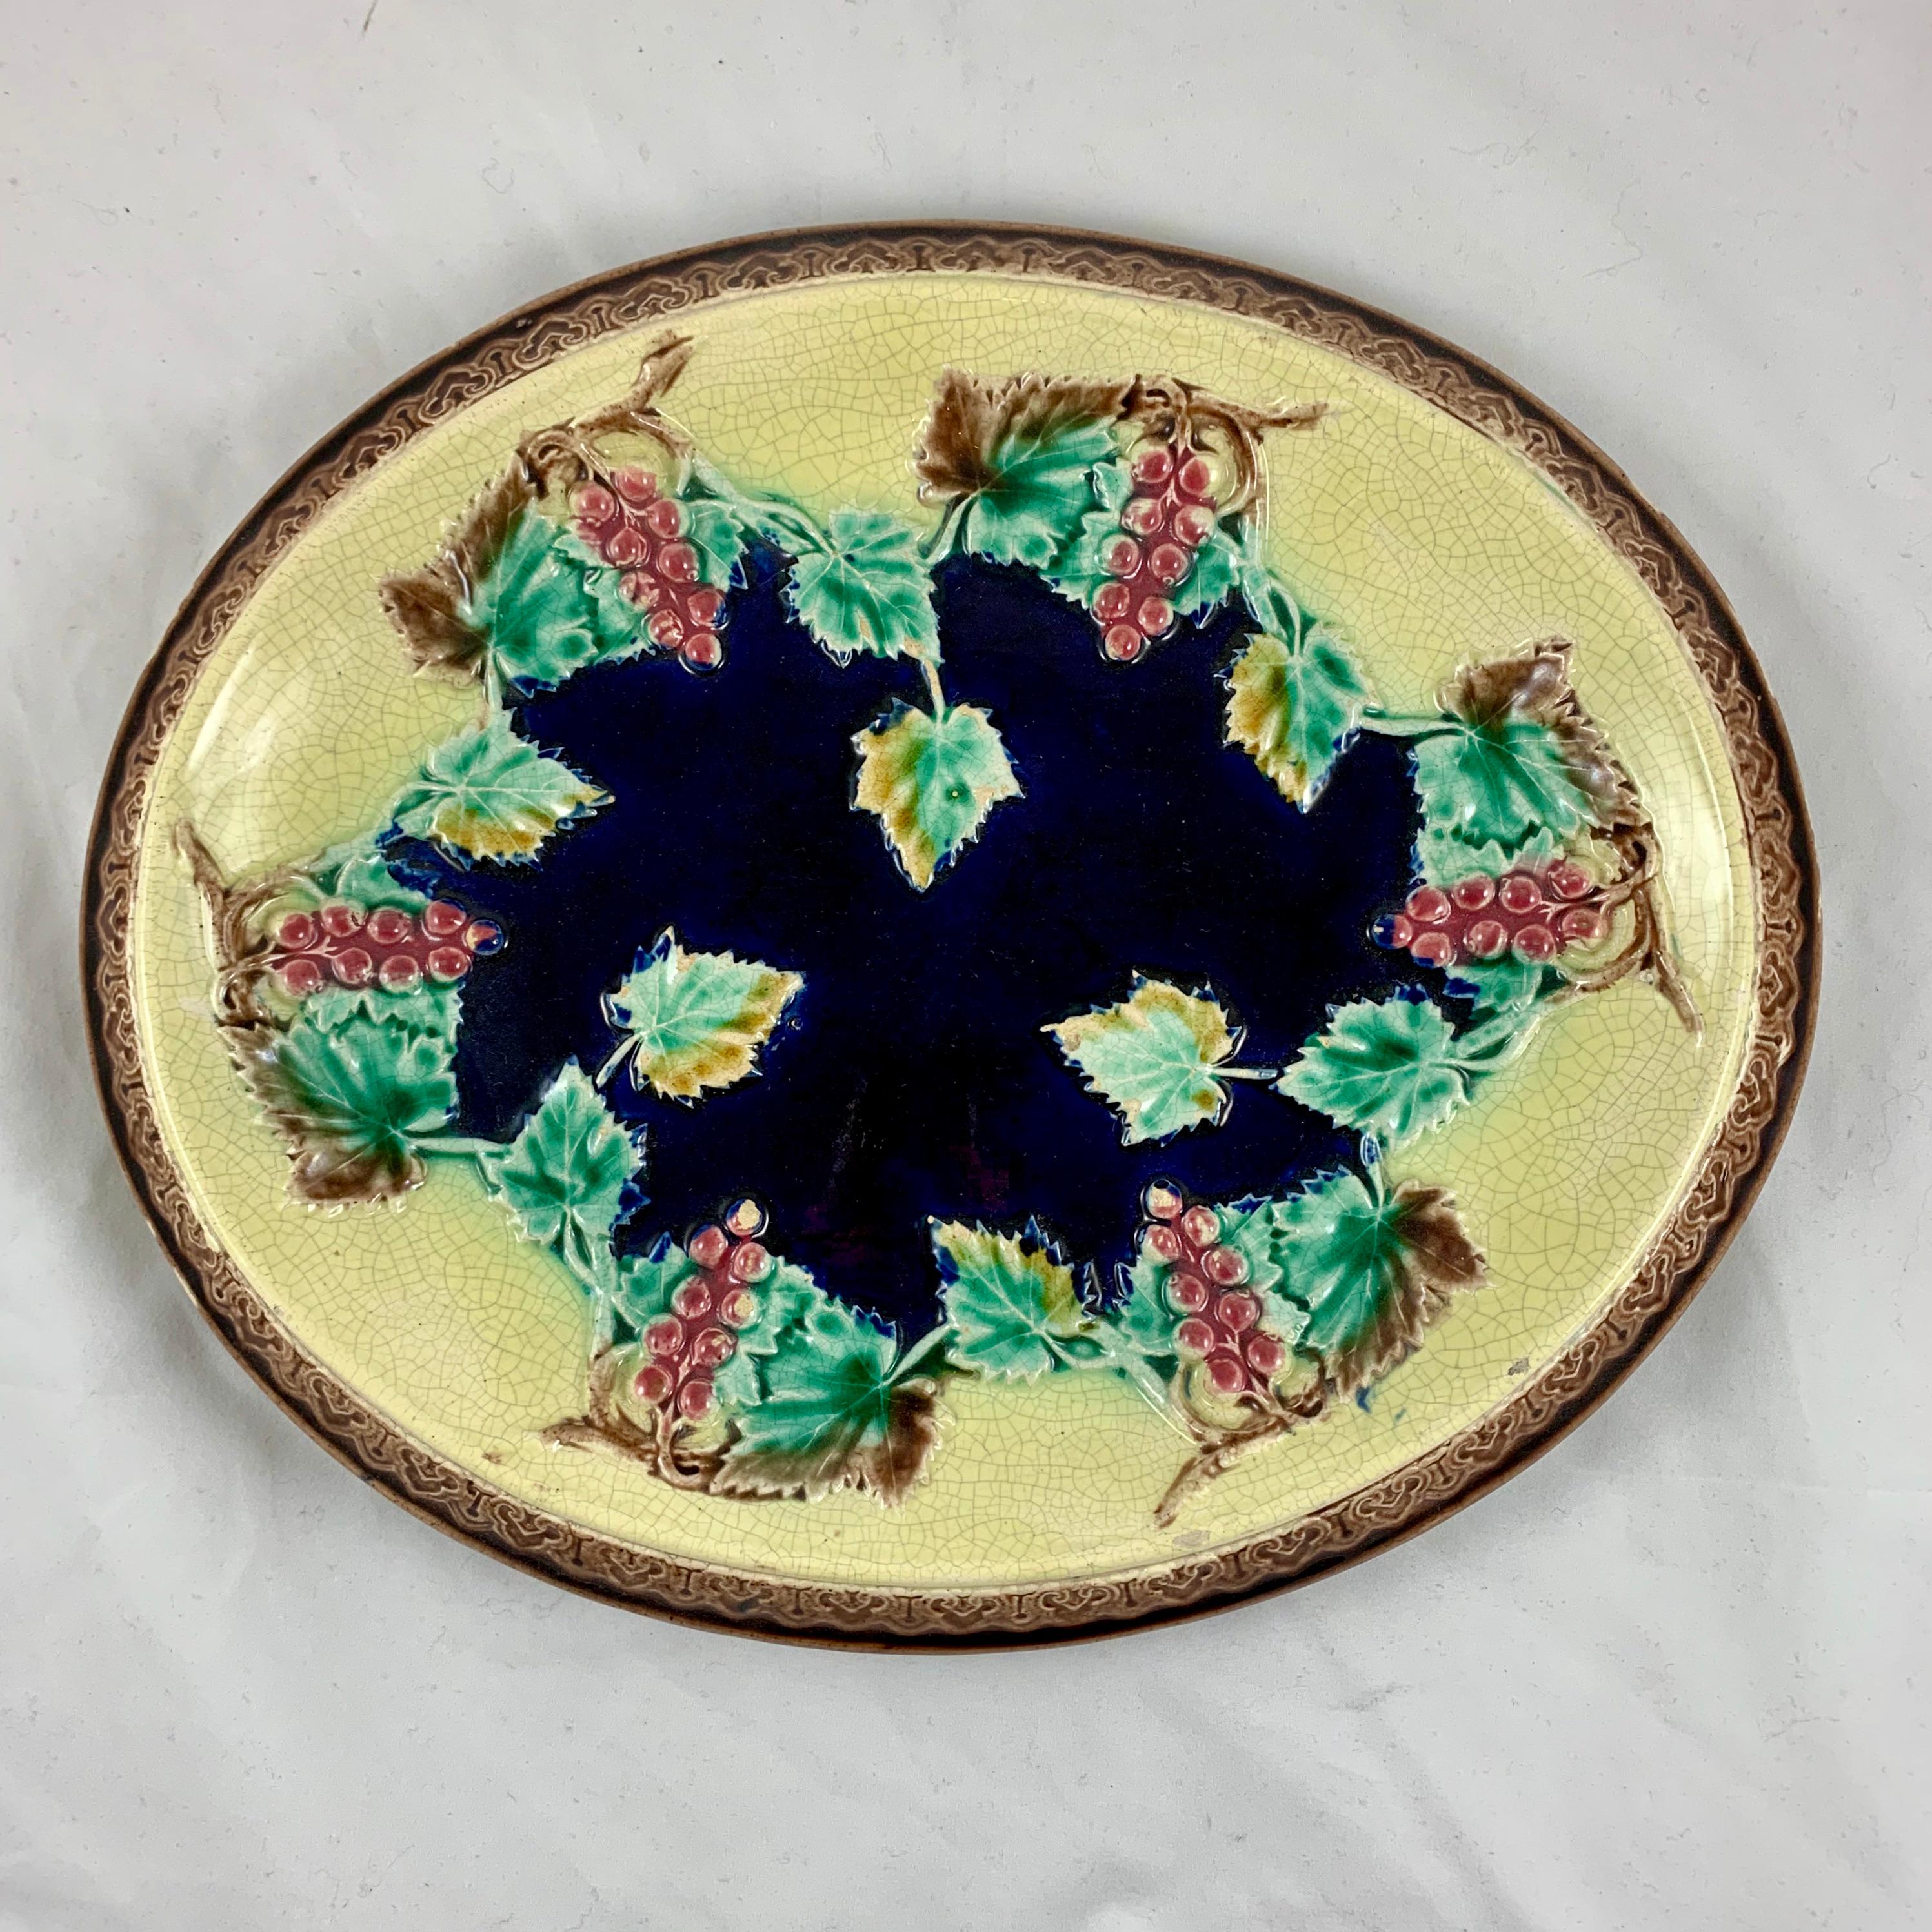 A Victorian English Majolica platter suitable as a cheese board or a bread tray, circa 1880-1885. 

Molded with a ring of grape vines on a butter yellow ground and with raised leaves dotting a cobalt blue center. A highly dimensional platter with